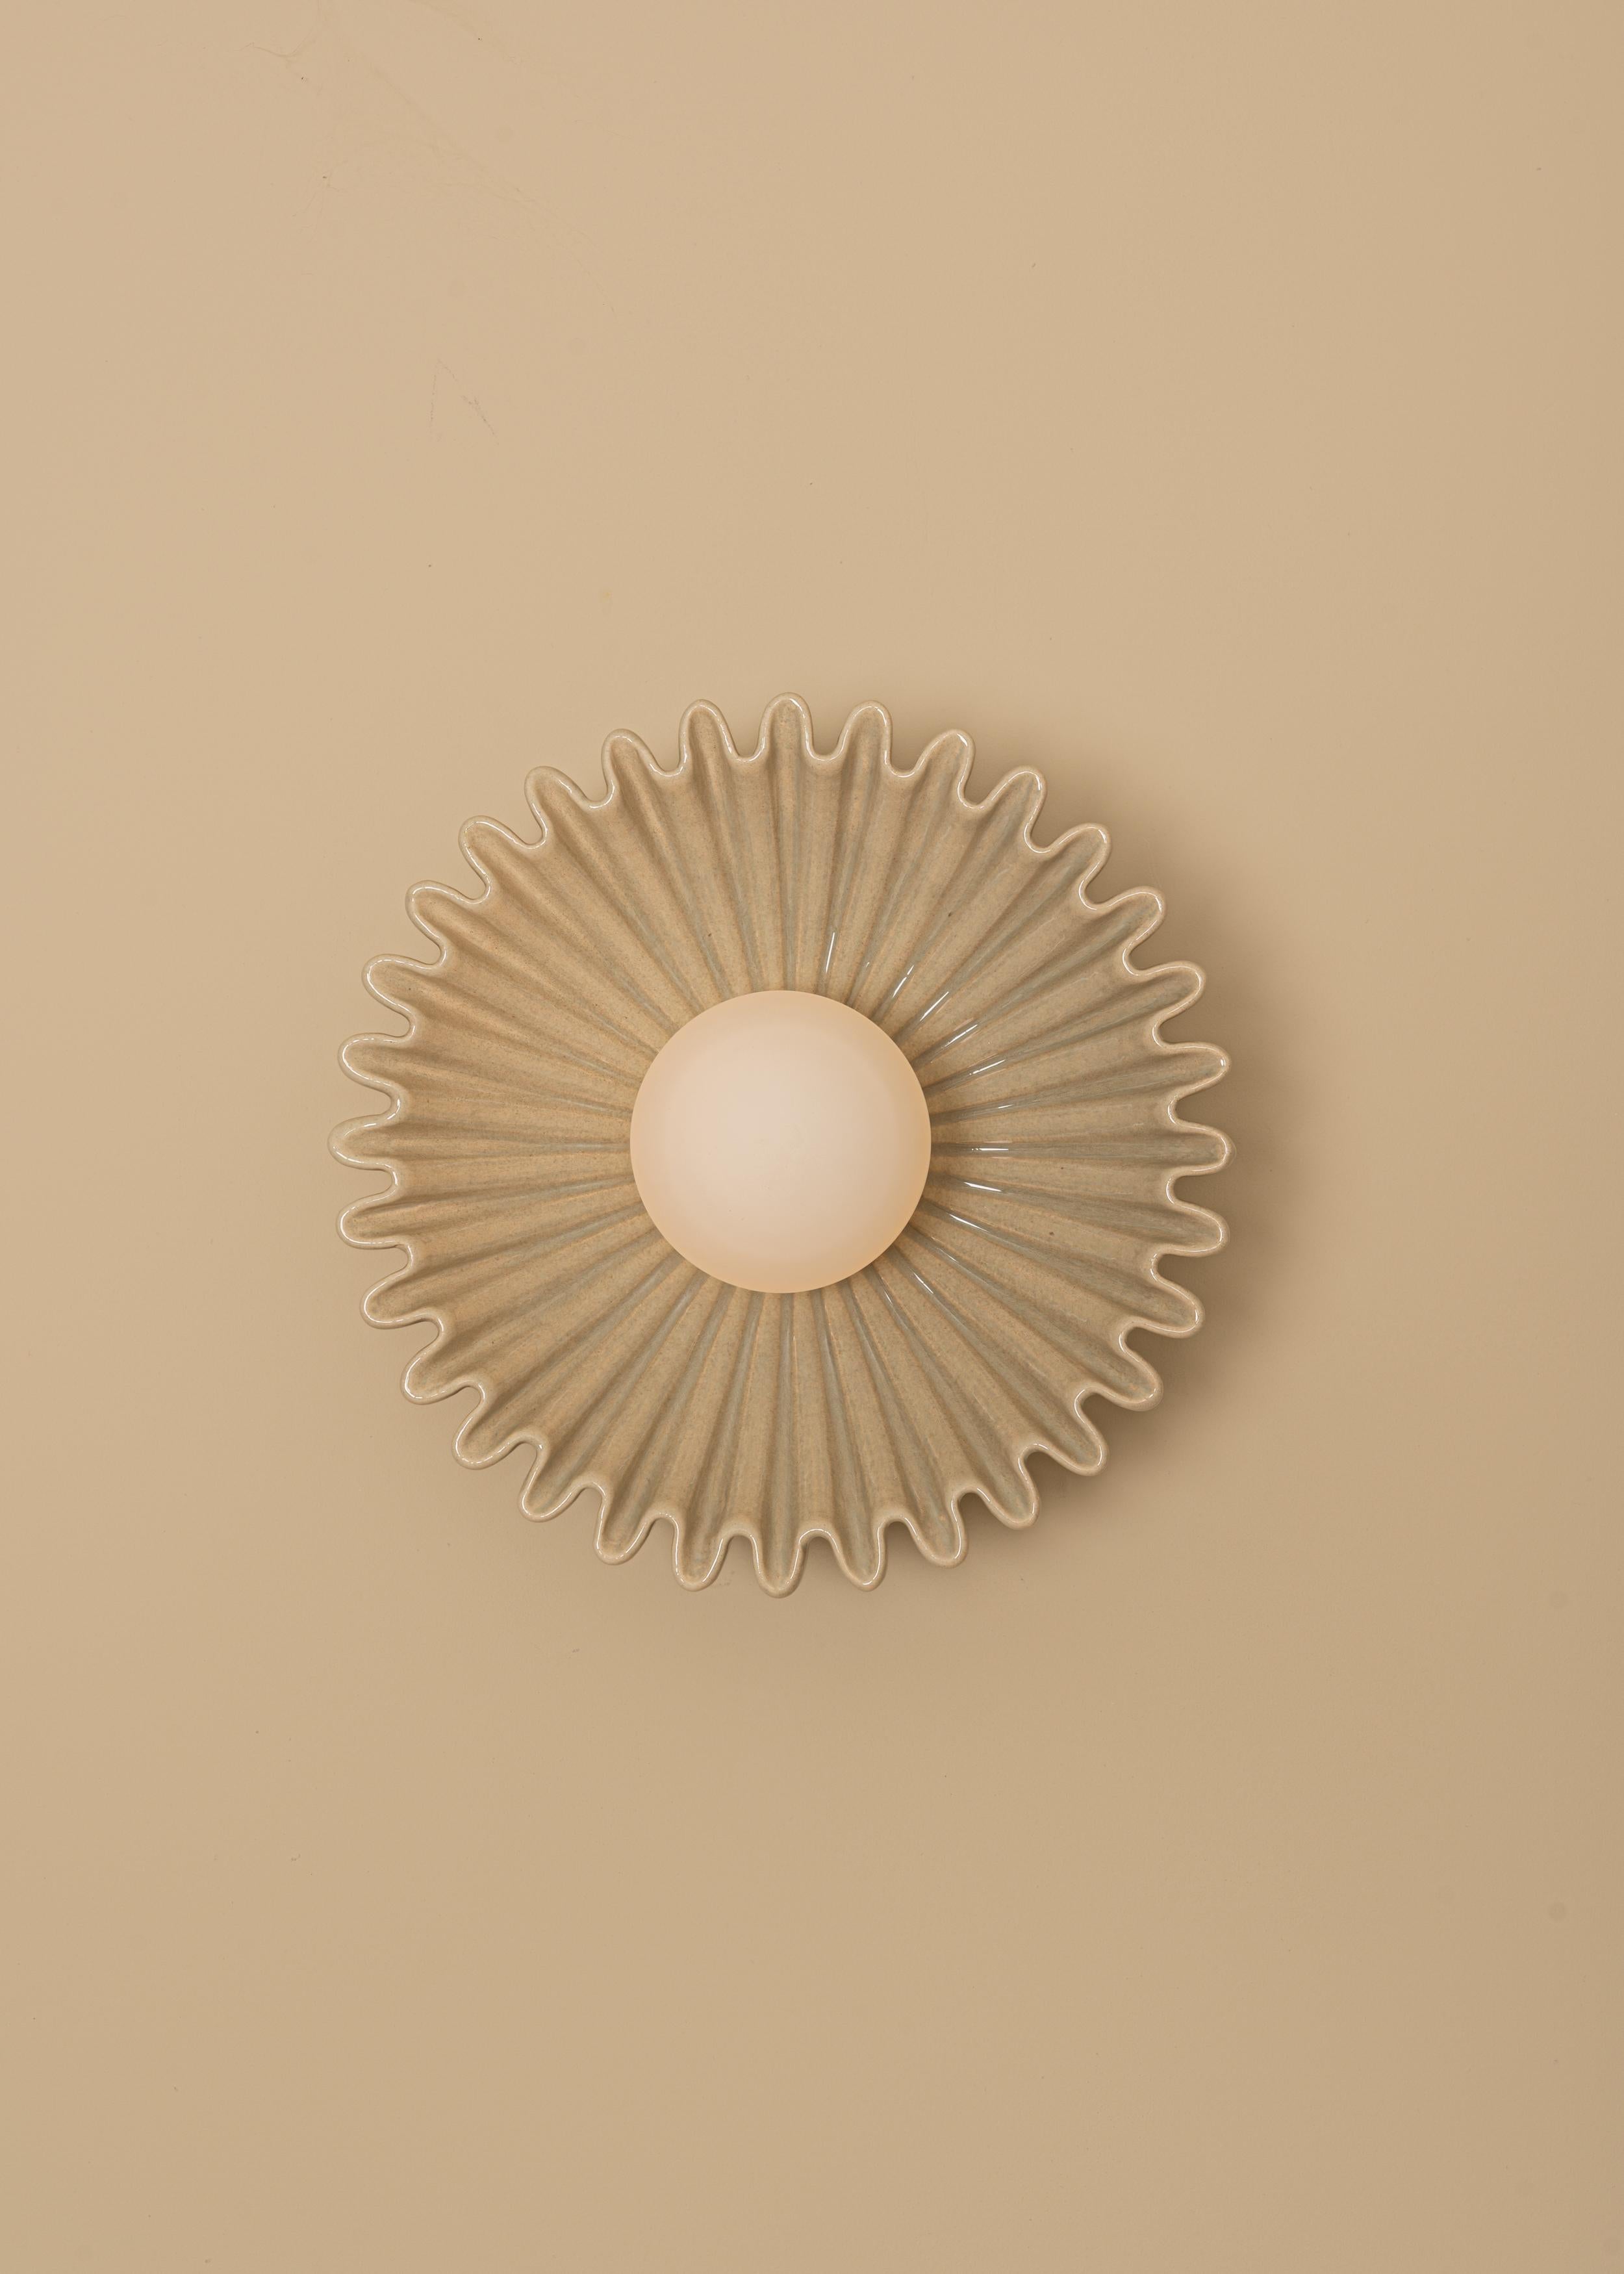 Ostro Sea Ceramic Wall Sconce by Simone & Marcel
Dimensions: D 17 x W 31 x H 31 cm.
Materials: Ceramic and glass.

Available in different ceramic and marble options and finishes. Custom options available on request. Please contact us. 

All our